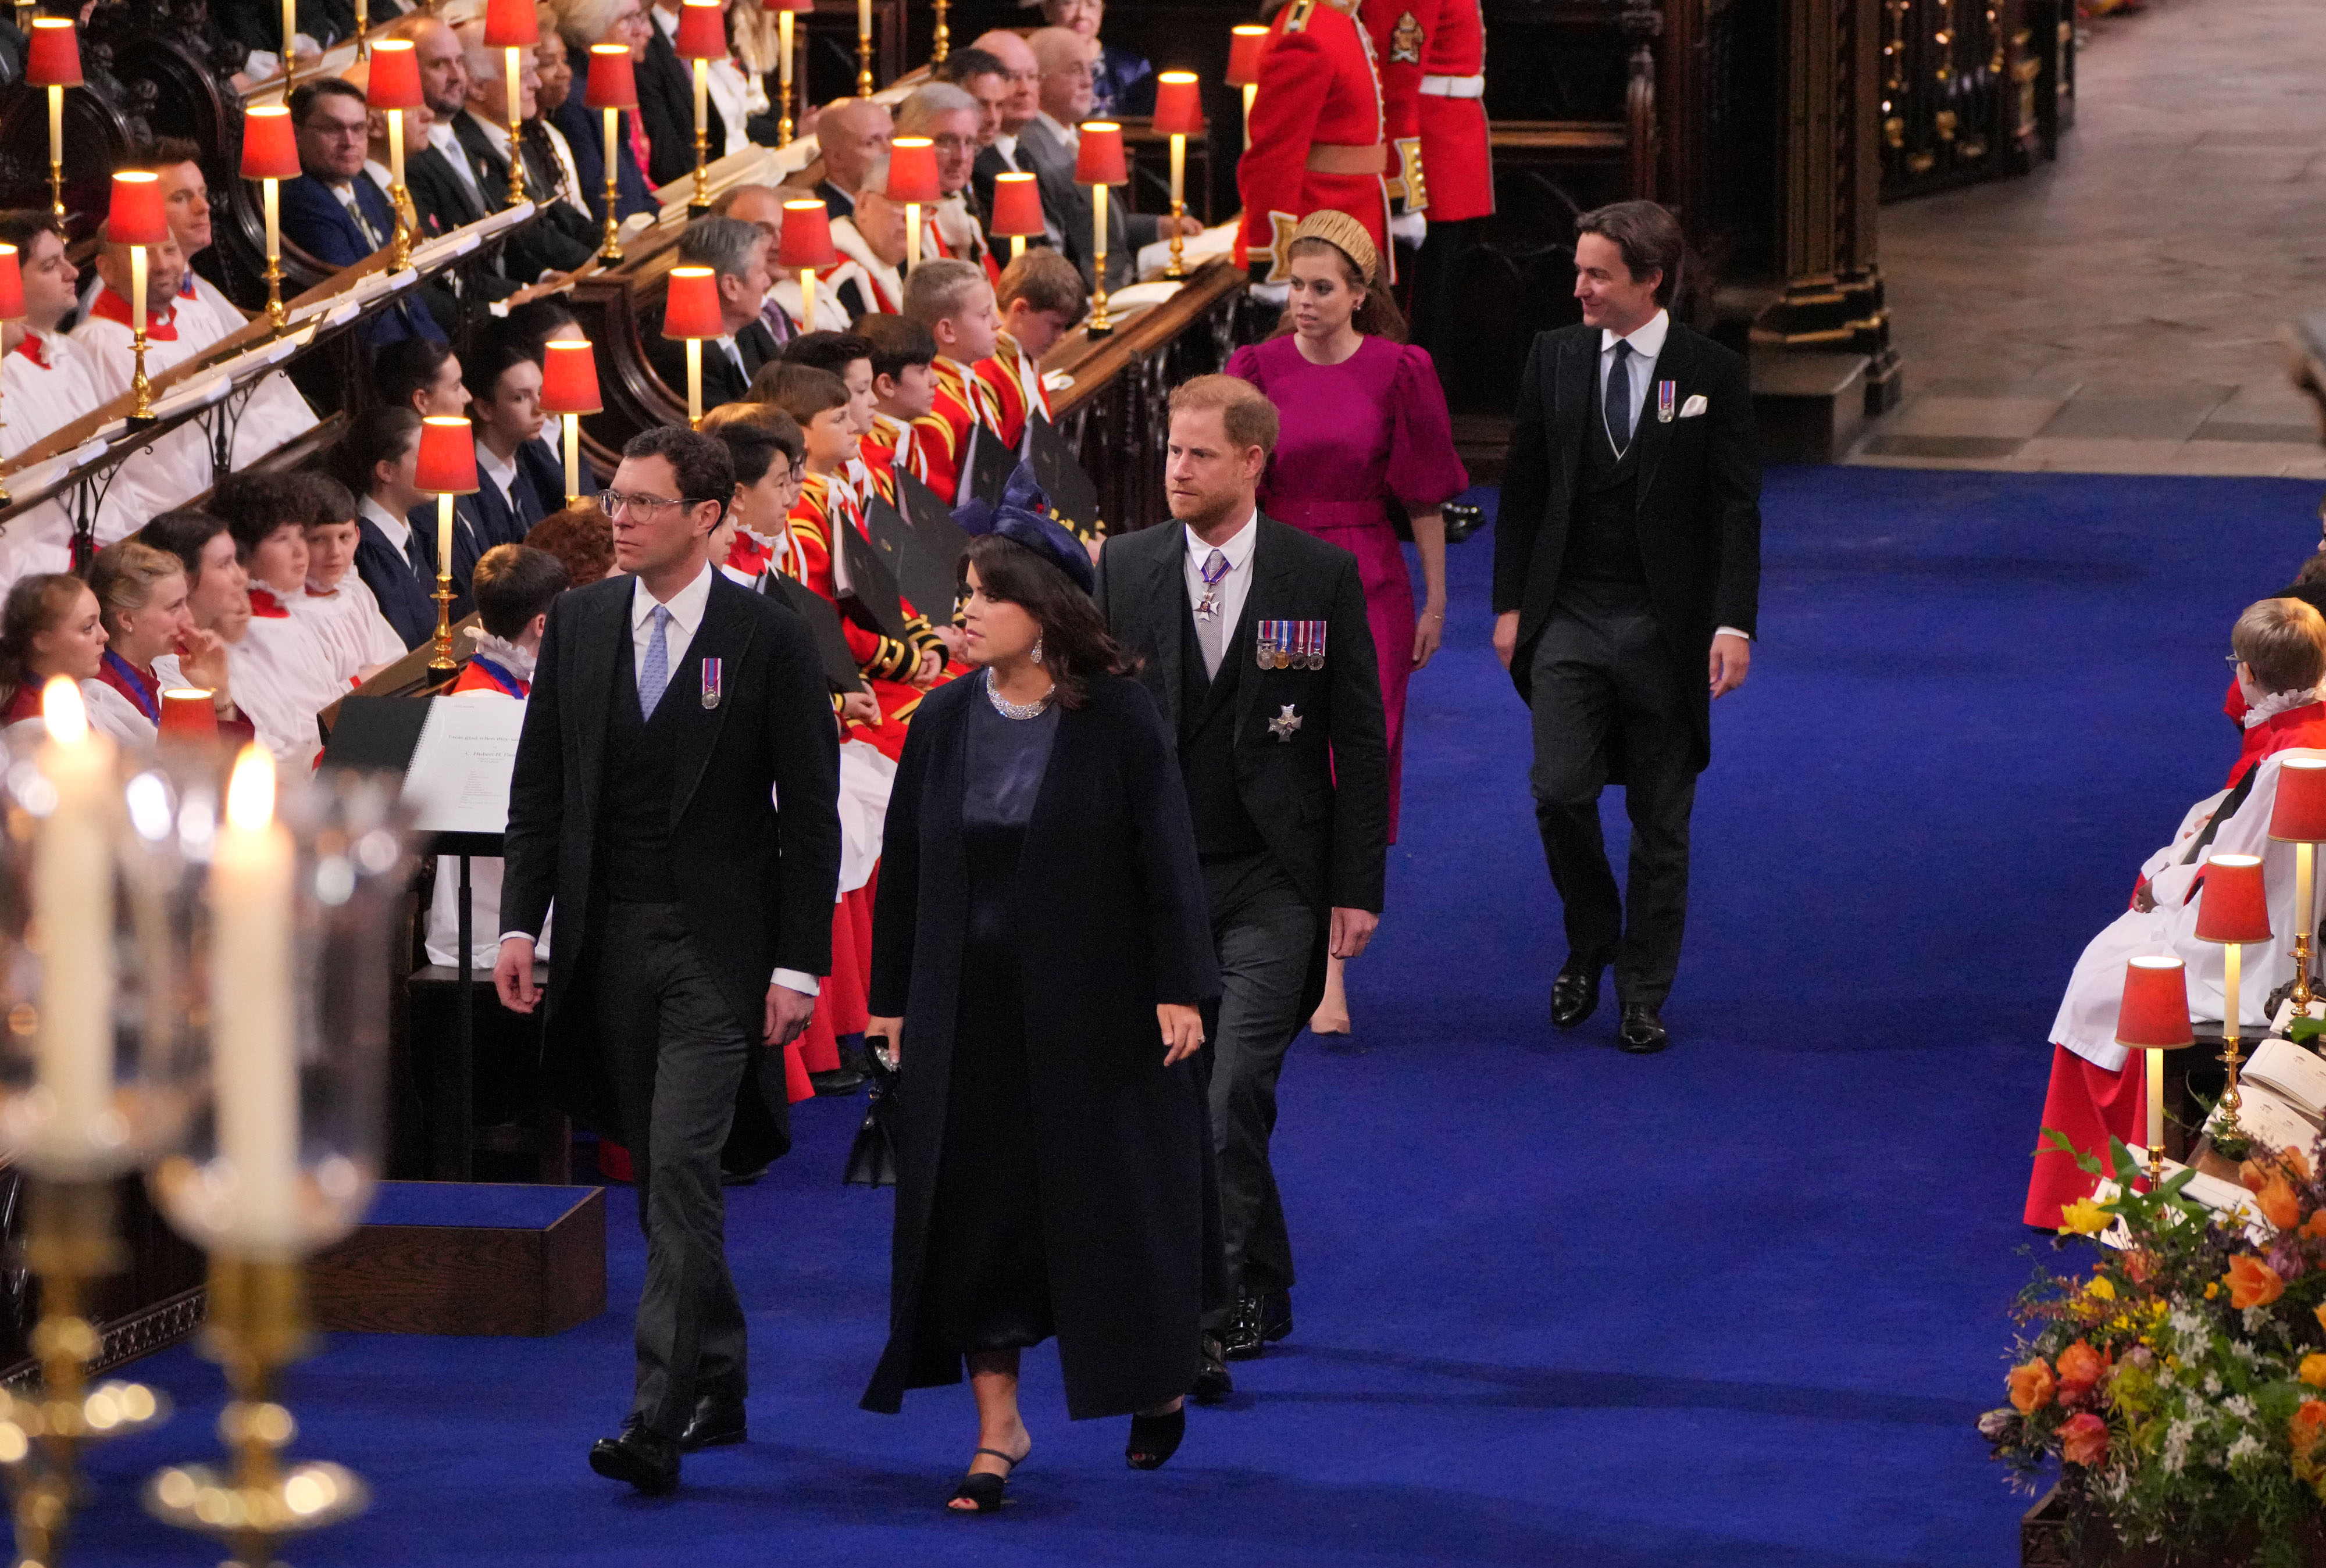 Members of the royal family arrive to attend the Coronation of King Charles III and Queen Camilla